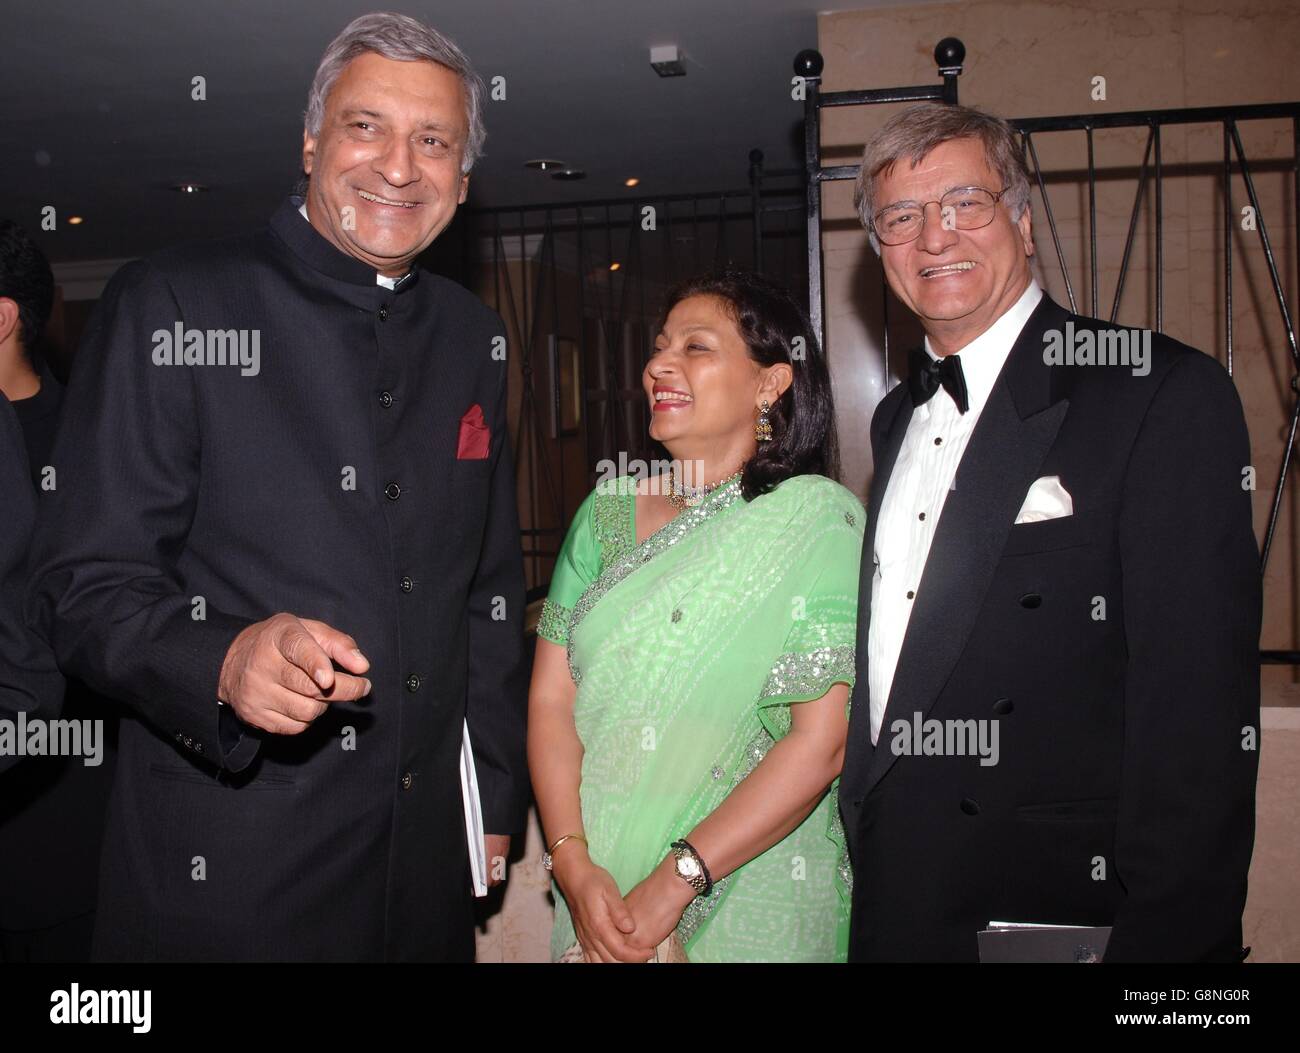 The High Commissioner for India, Kanlesh Sharma (left) and his wife Mrs Mohini Sharma with Sir Goolam Noon MBE, Chairman of Noon Products, at a Park Lane reception to launch Asian Power 100, a list of the 100 most successful and influential British Asians. Stock Photo